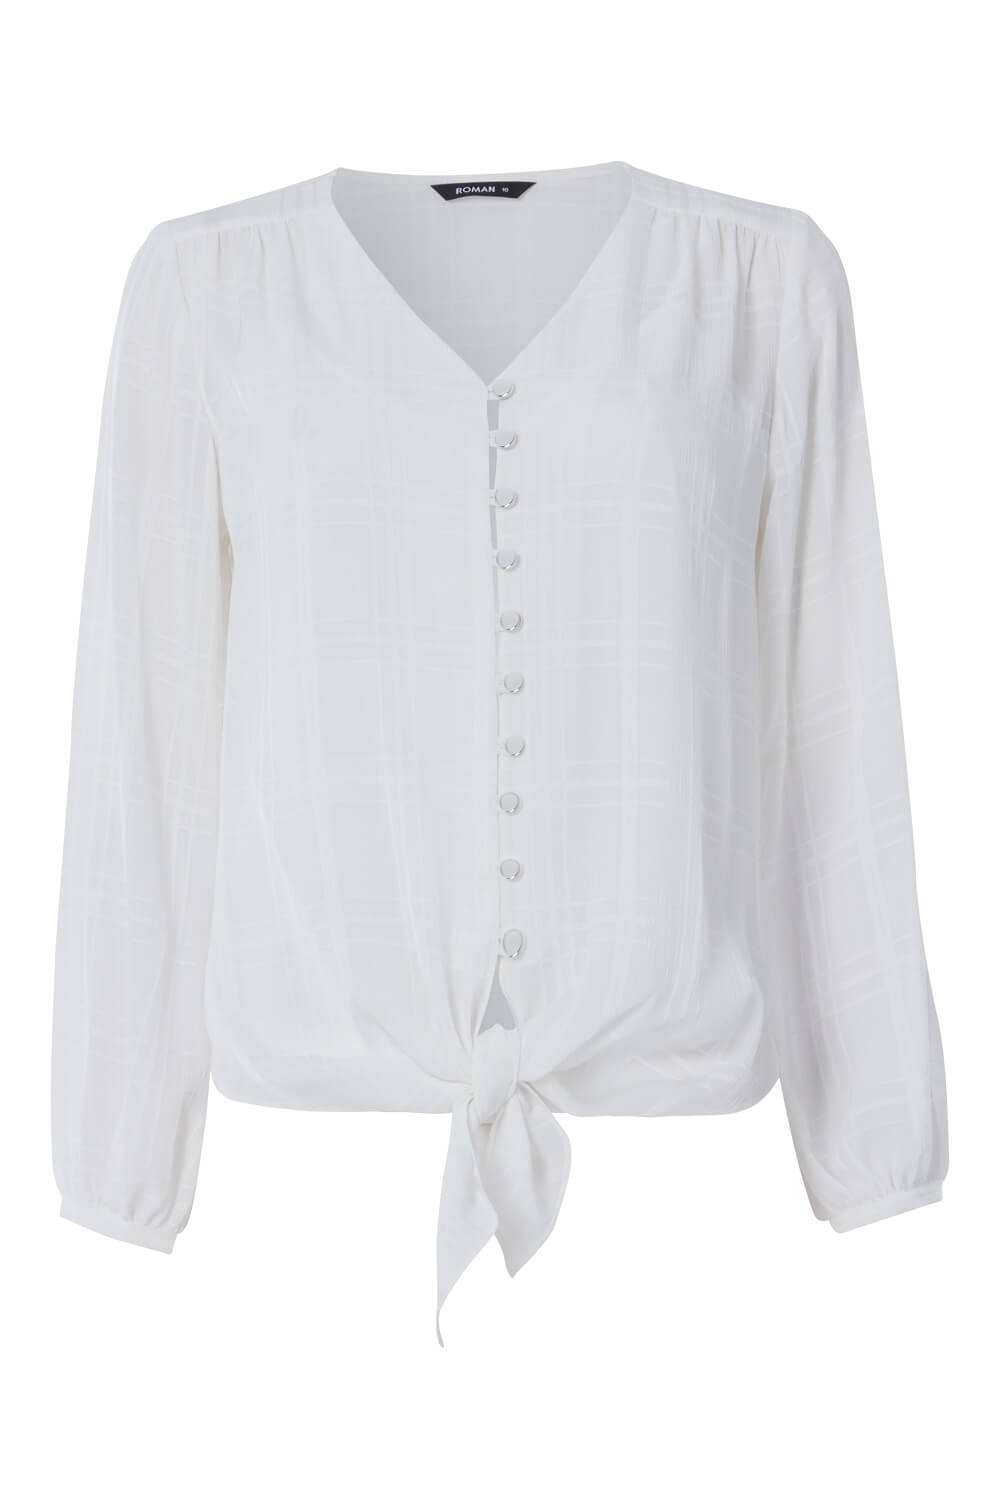 Check Tie Front Blouse in Ivory - Roman Originals UK